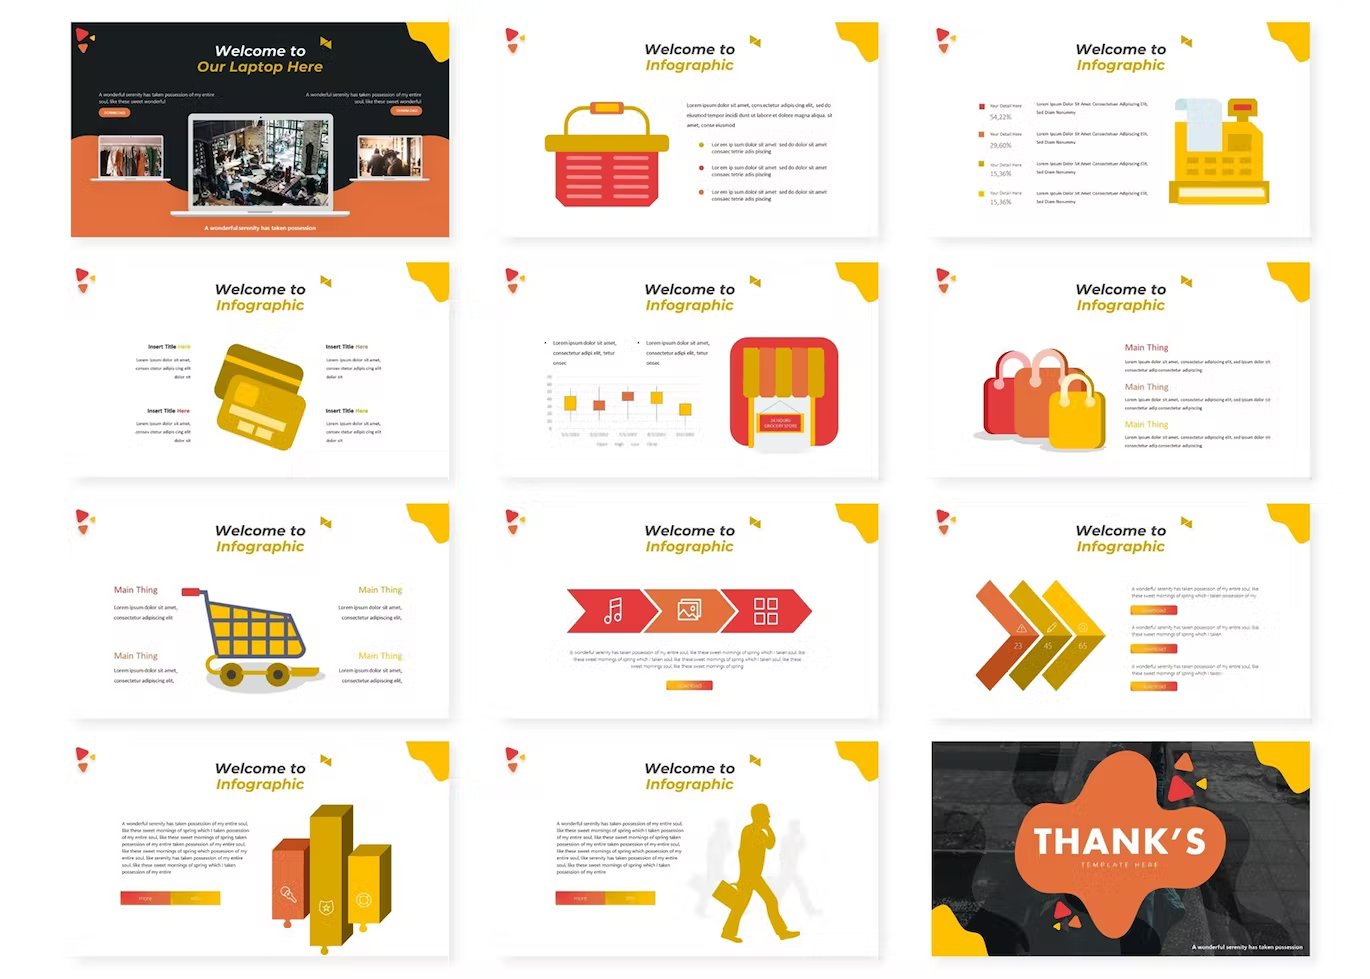 A set of 12 different shop google slides templates in red, orange, yellow, white and dark gray on a white background.